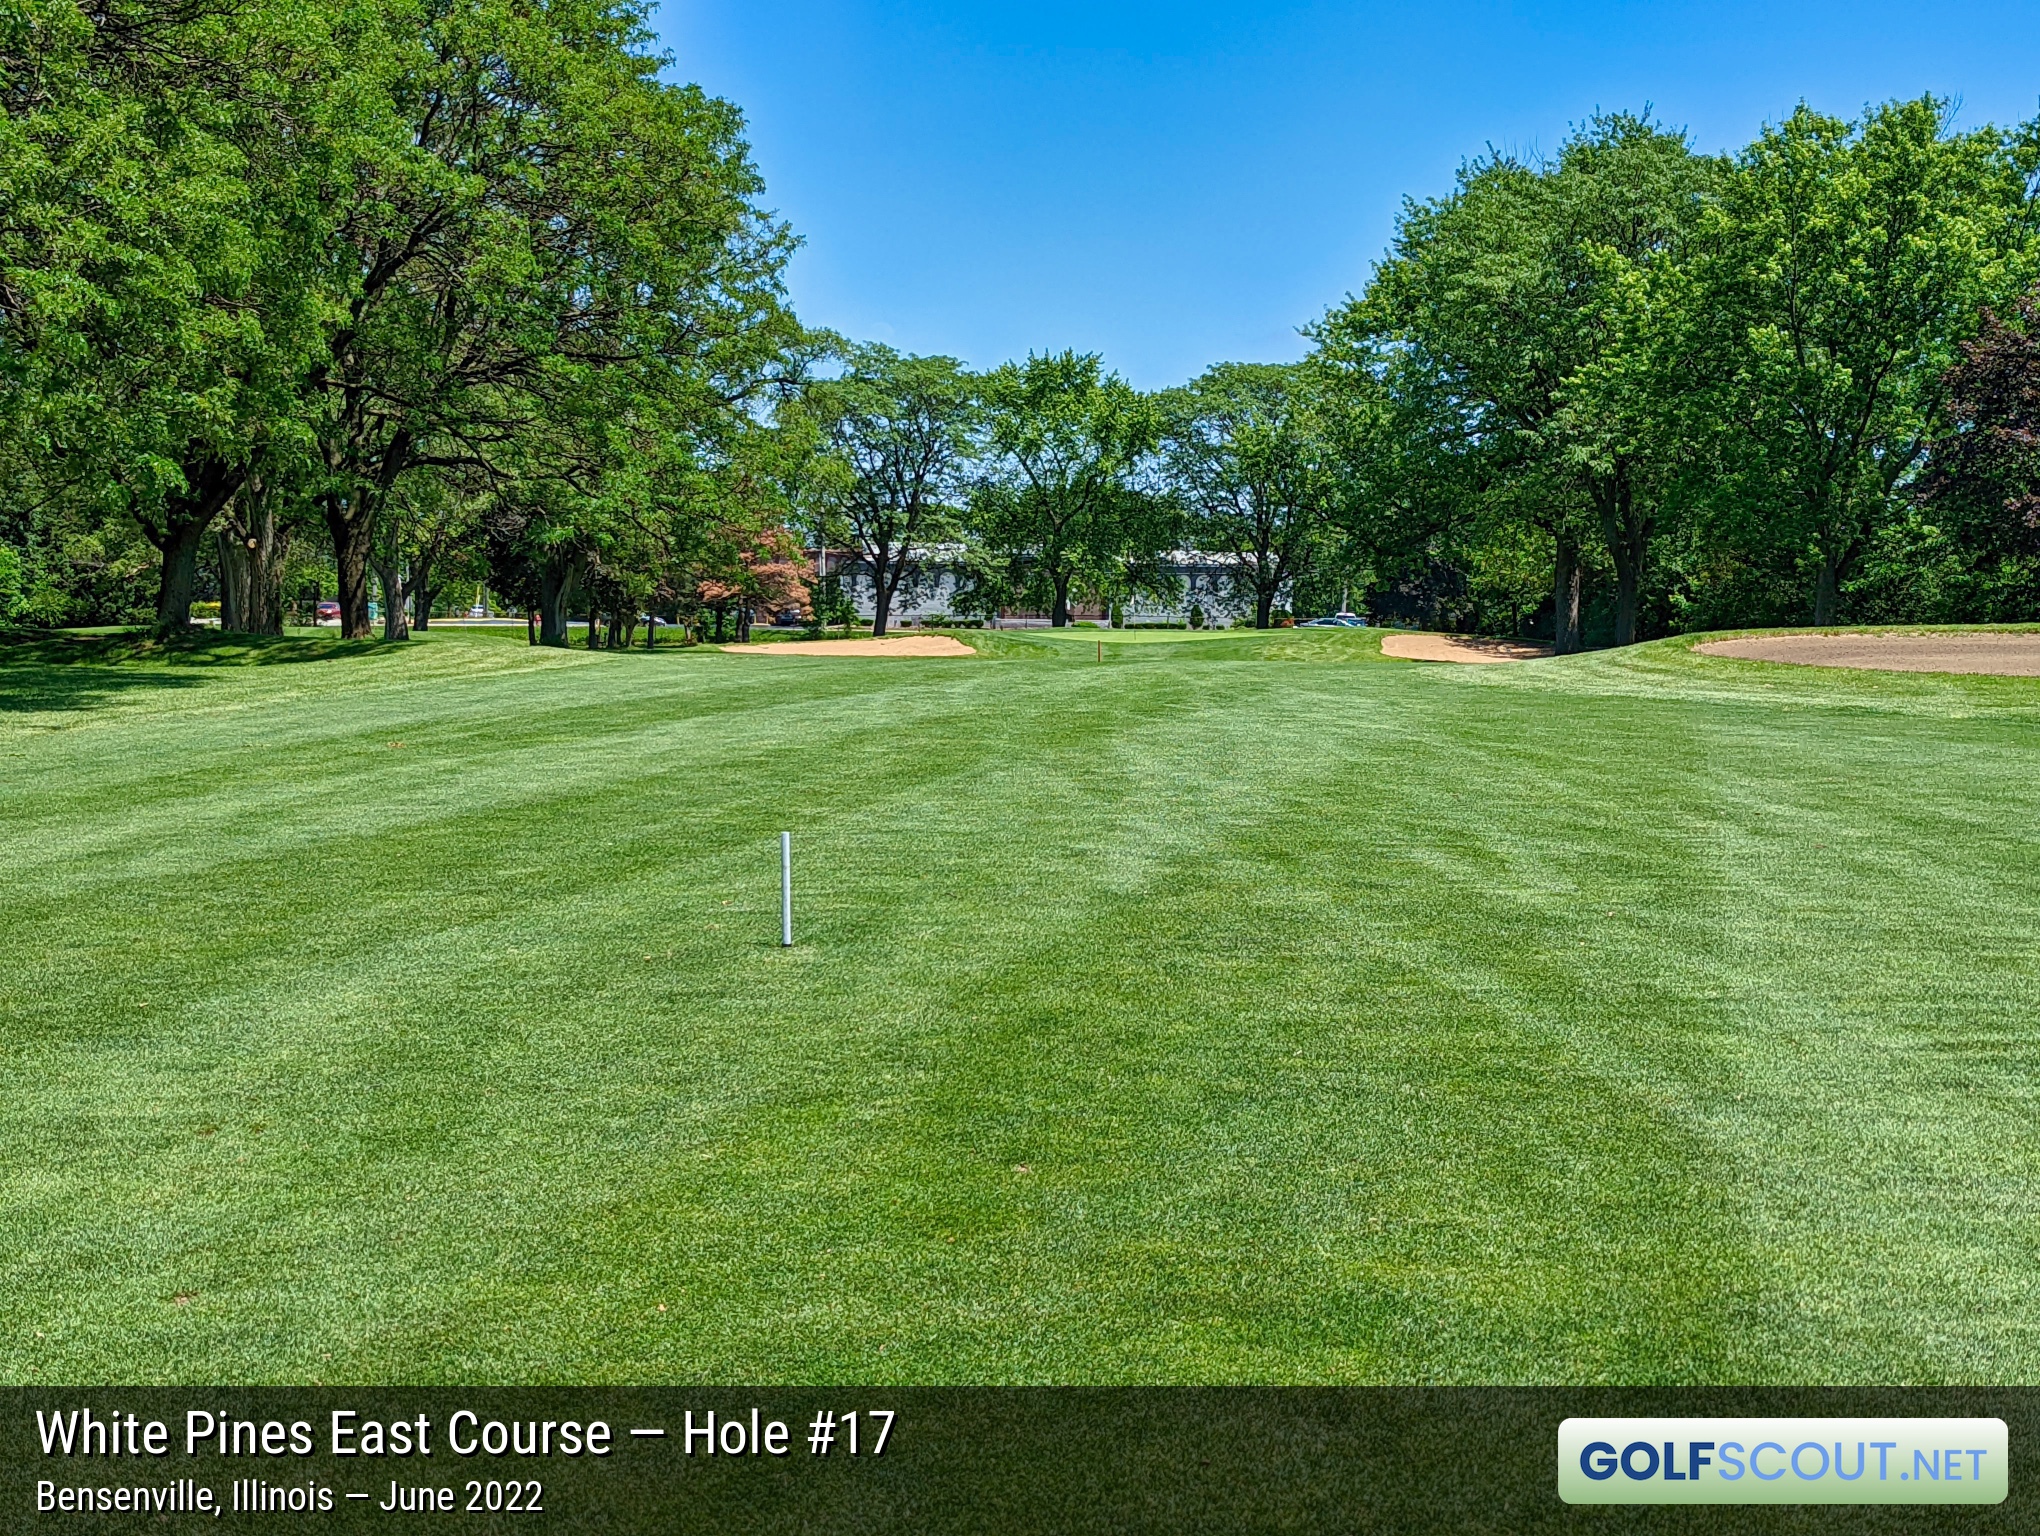 Photo of hole #17 at White Pines East Course in Bensenville, Illinois. 